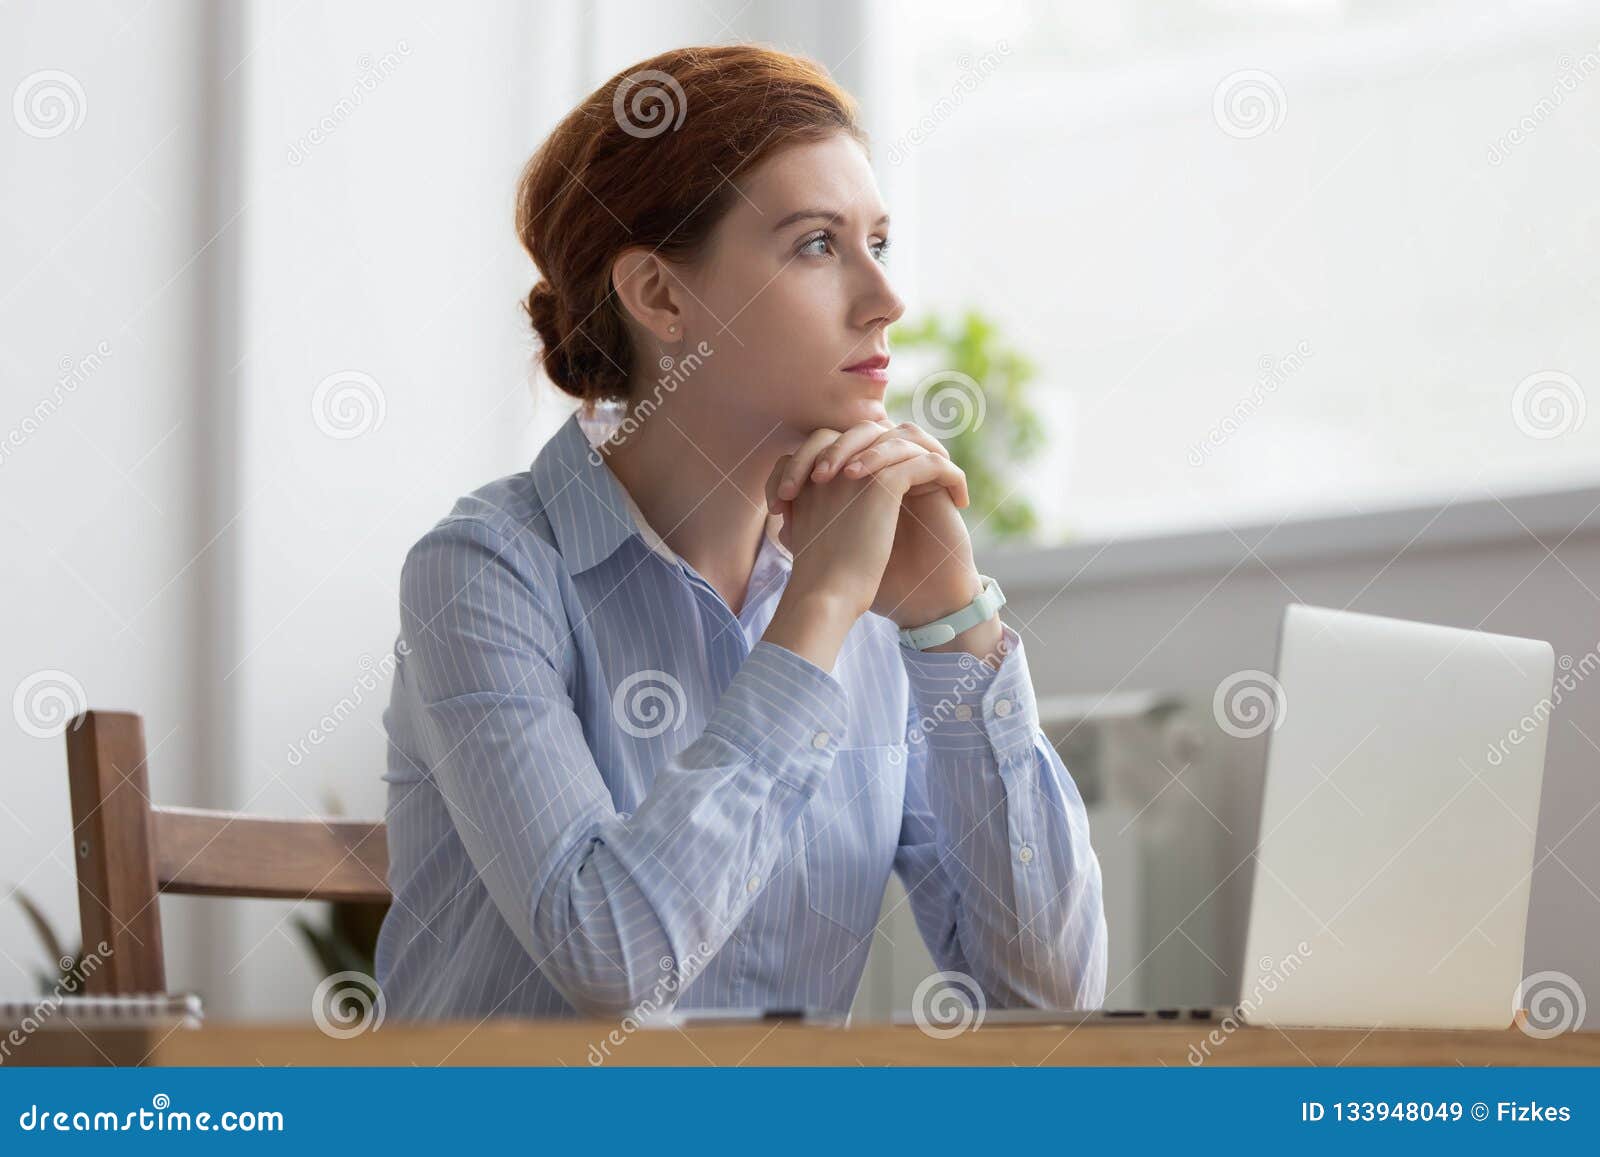 lost in thoughts woman sits at workplace desk in office